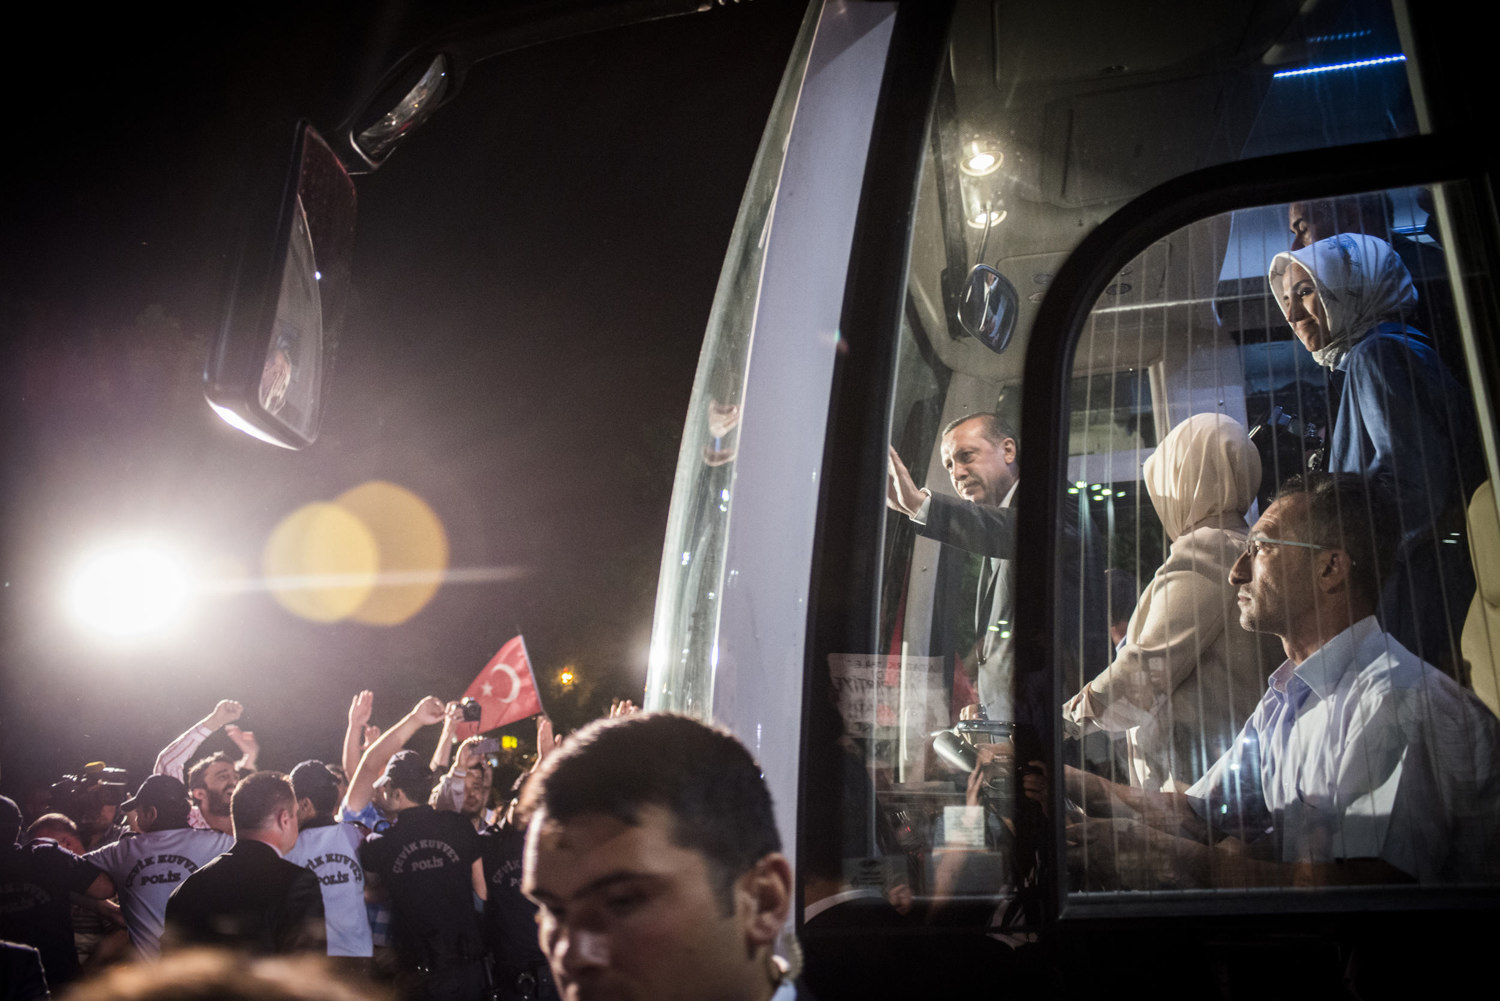  Prime Minister Erdogan and his wife Emine as they leave the airport. AKP Supporters at Ataturk International Airport come out by the thousands to support Prime Minister Erdogan on his return from Tunisia. In a speech thanking his supporters he pledg